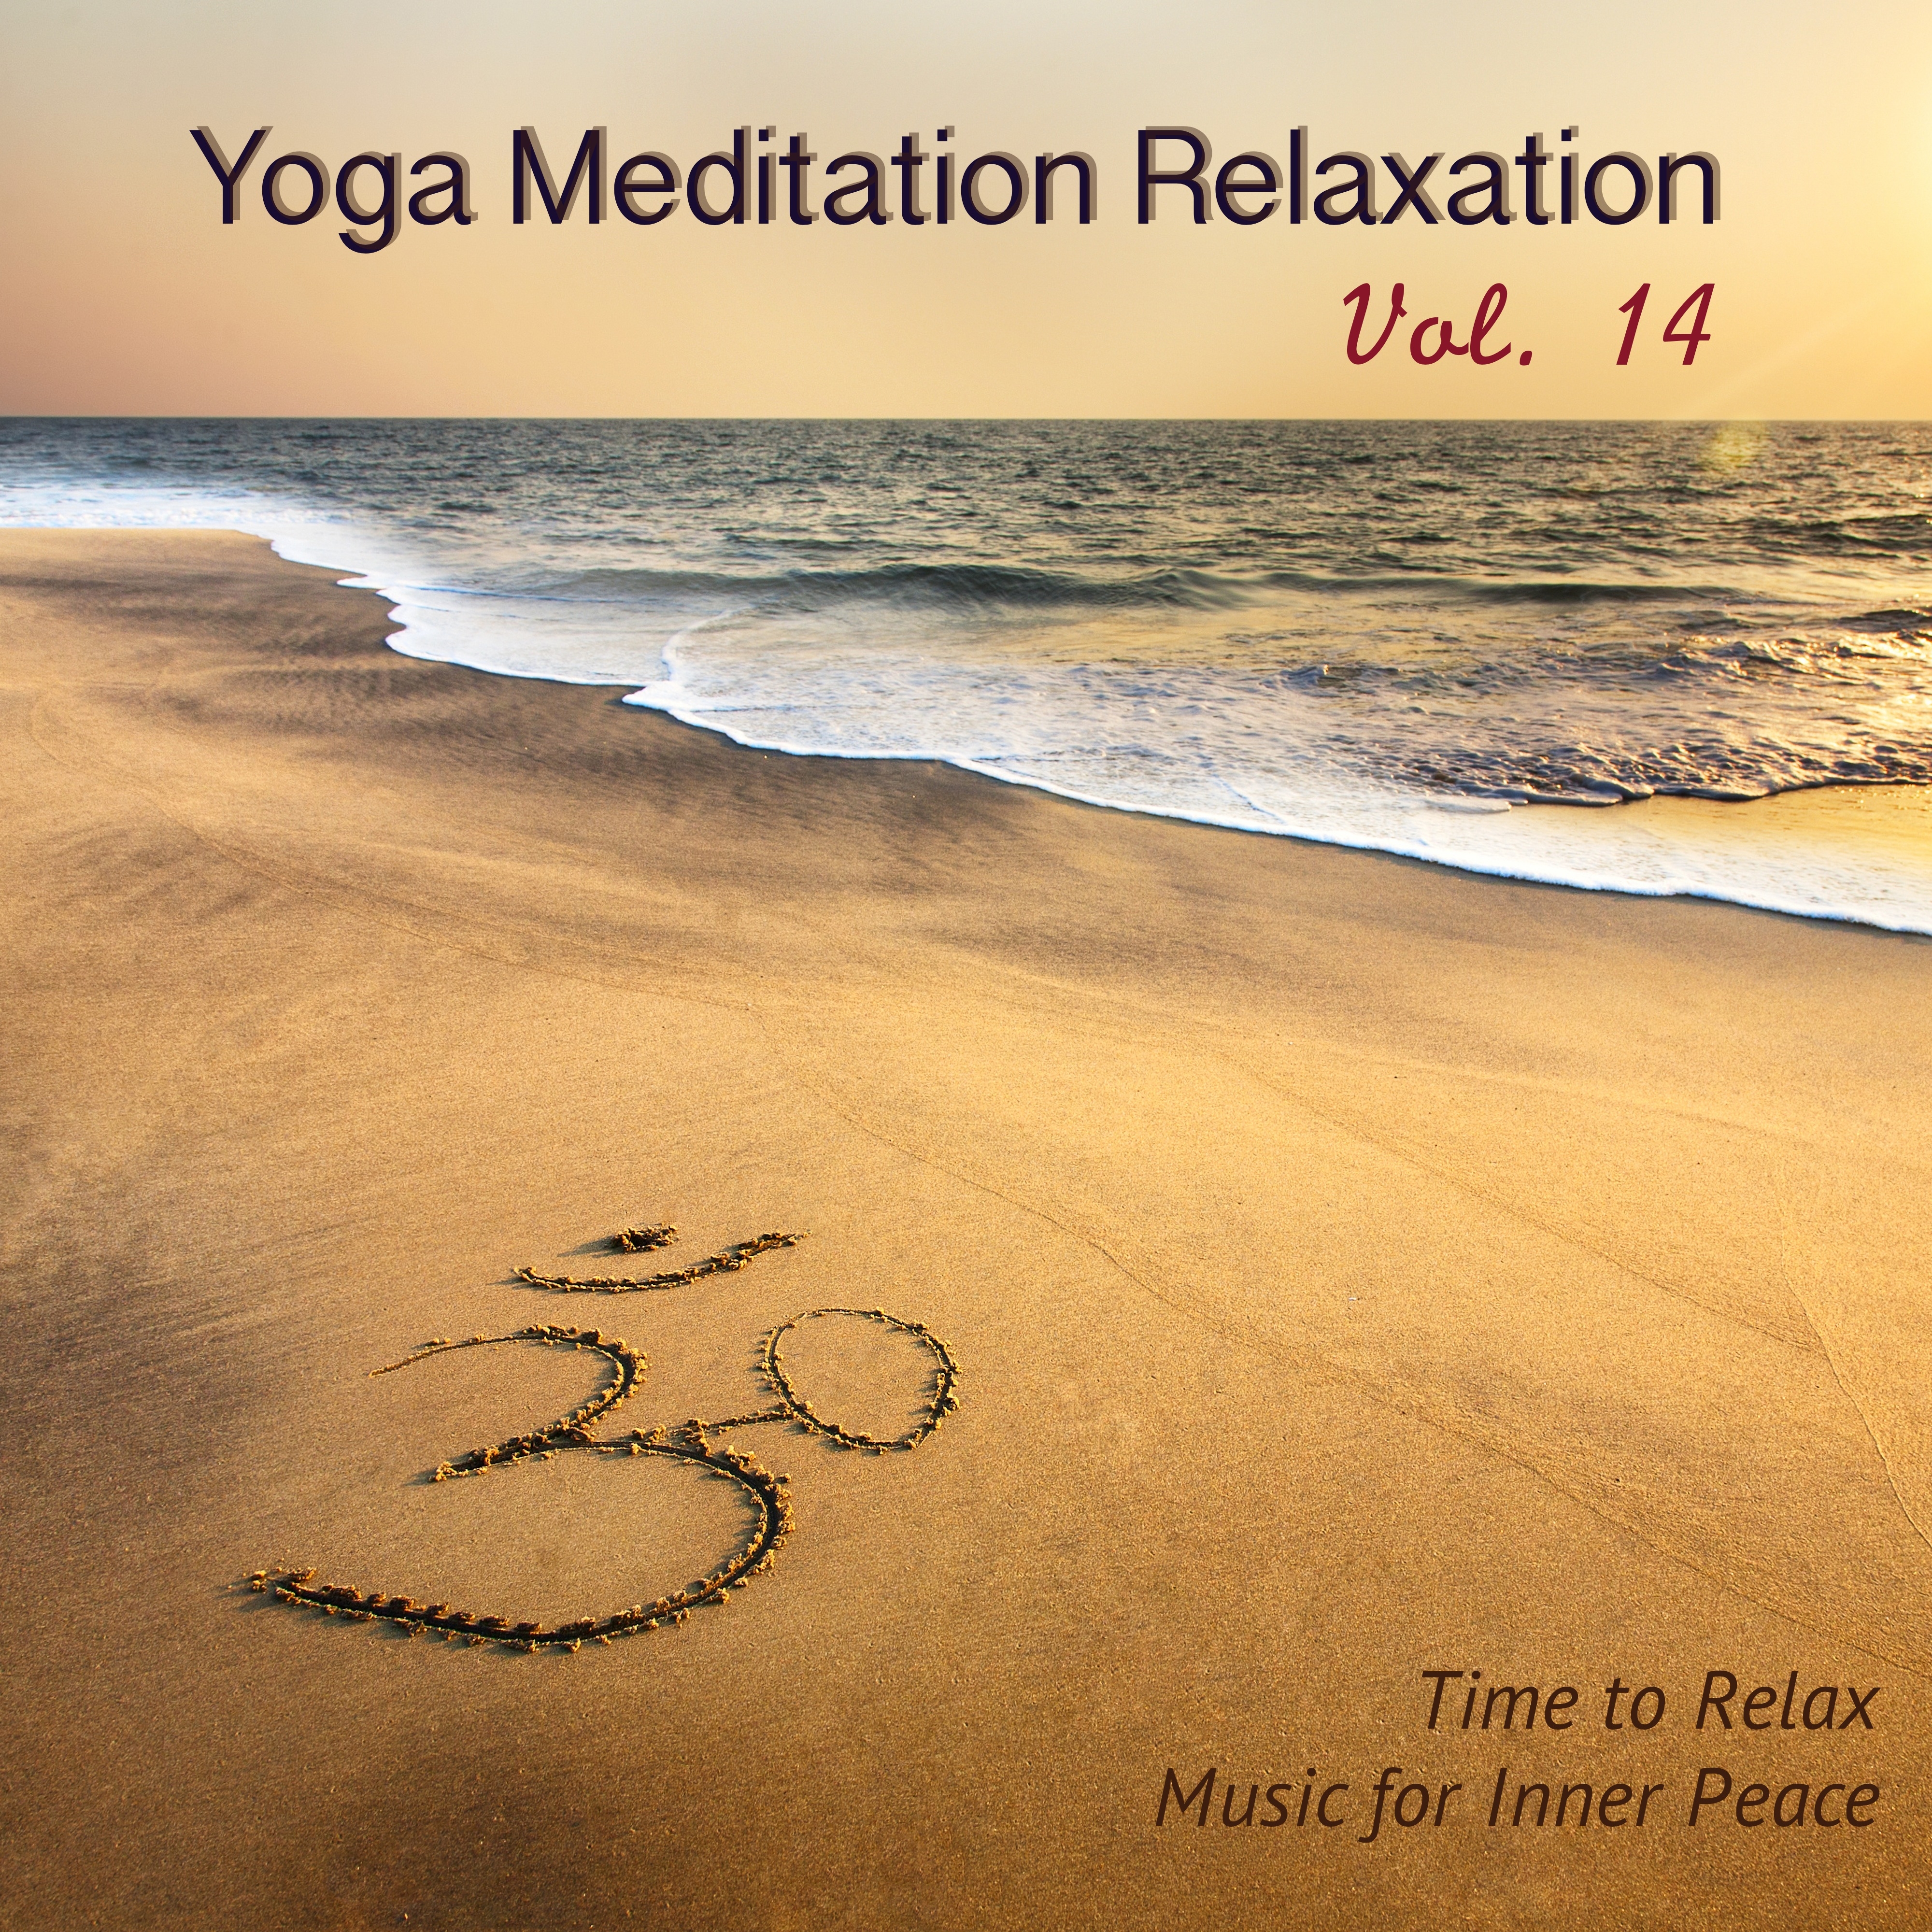 Yoga Meditation Relaxation, Vol. 14 - Time to Relax, Music for Inner Peace